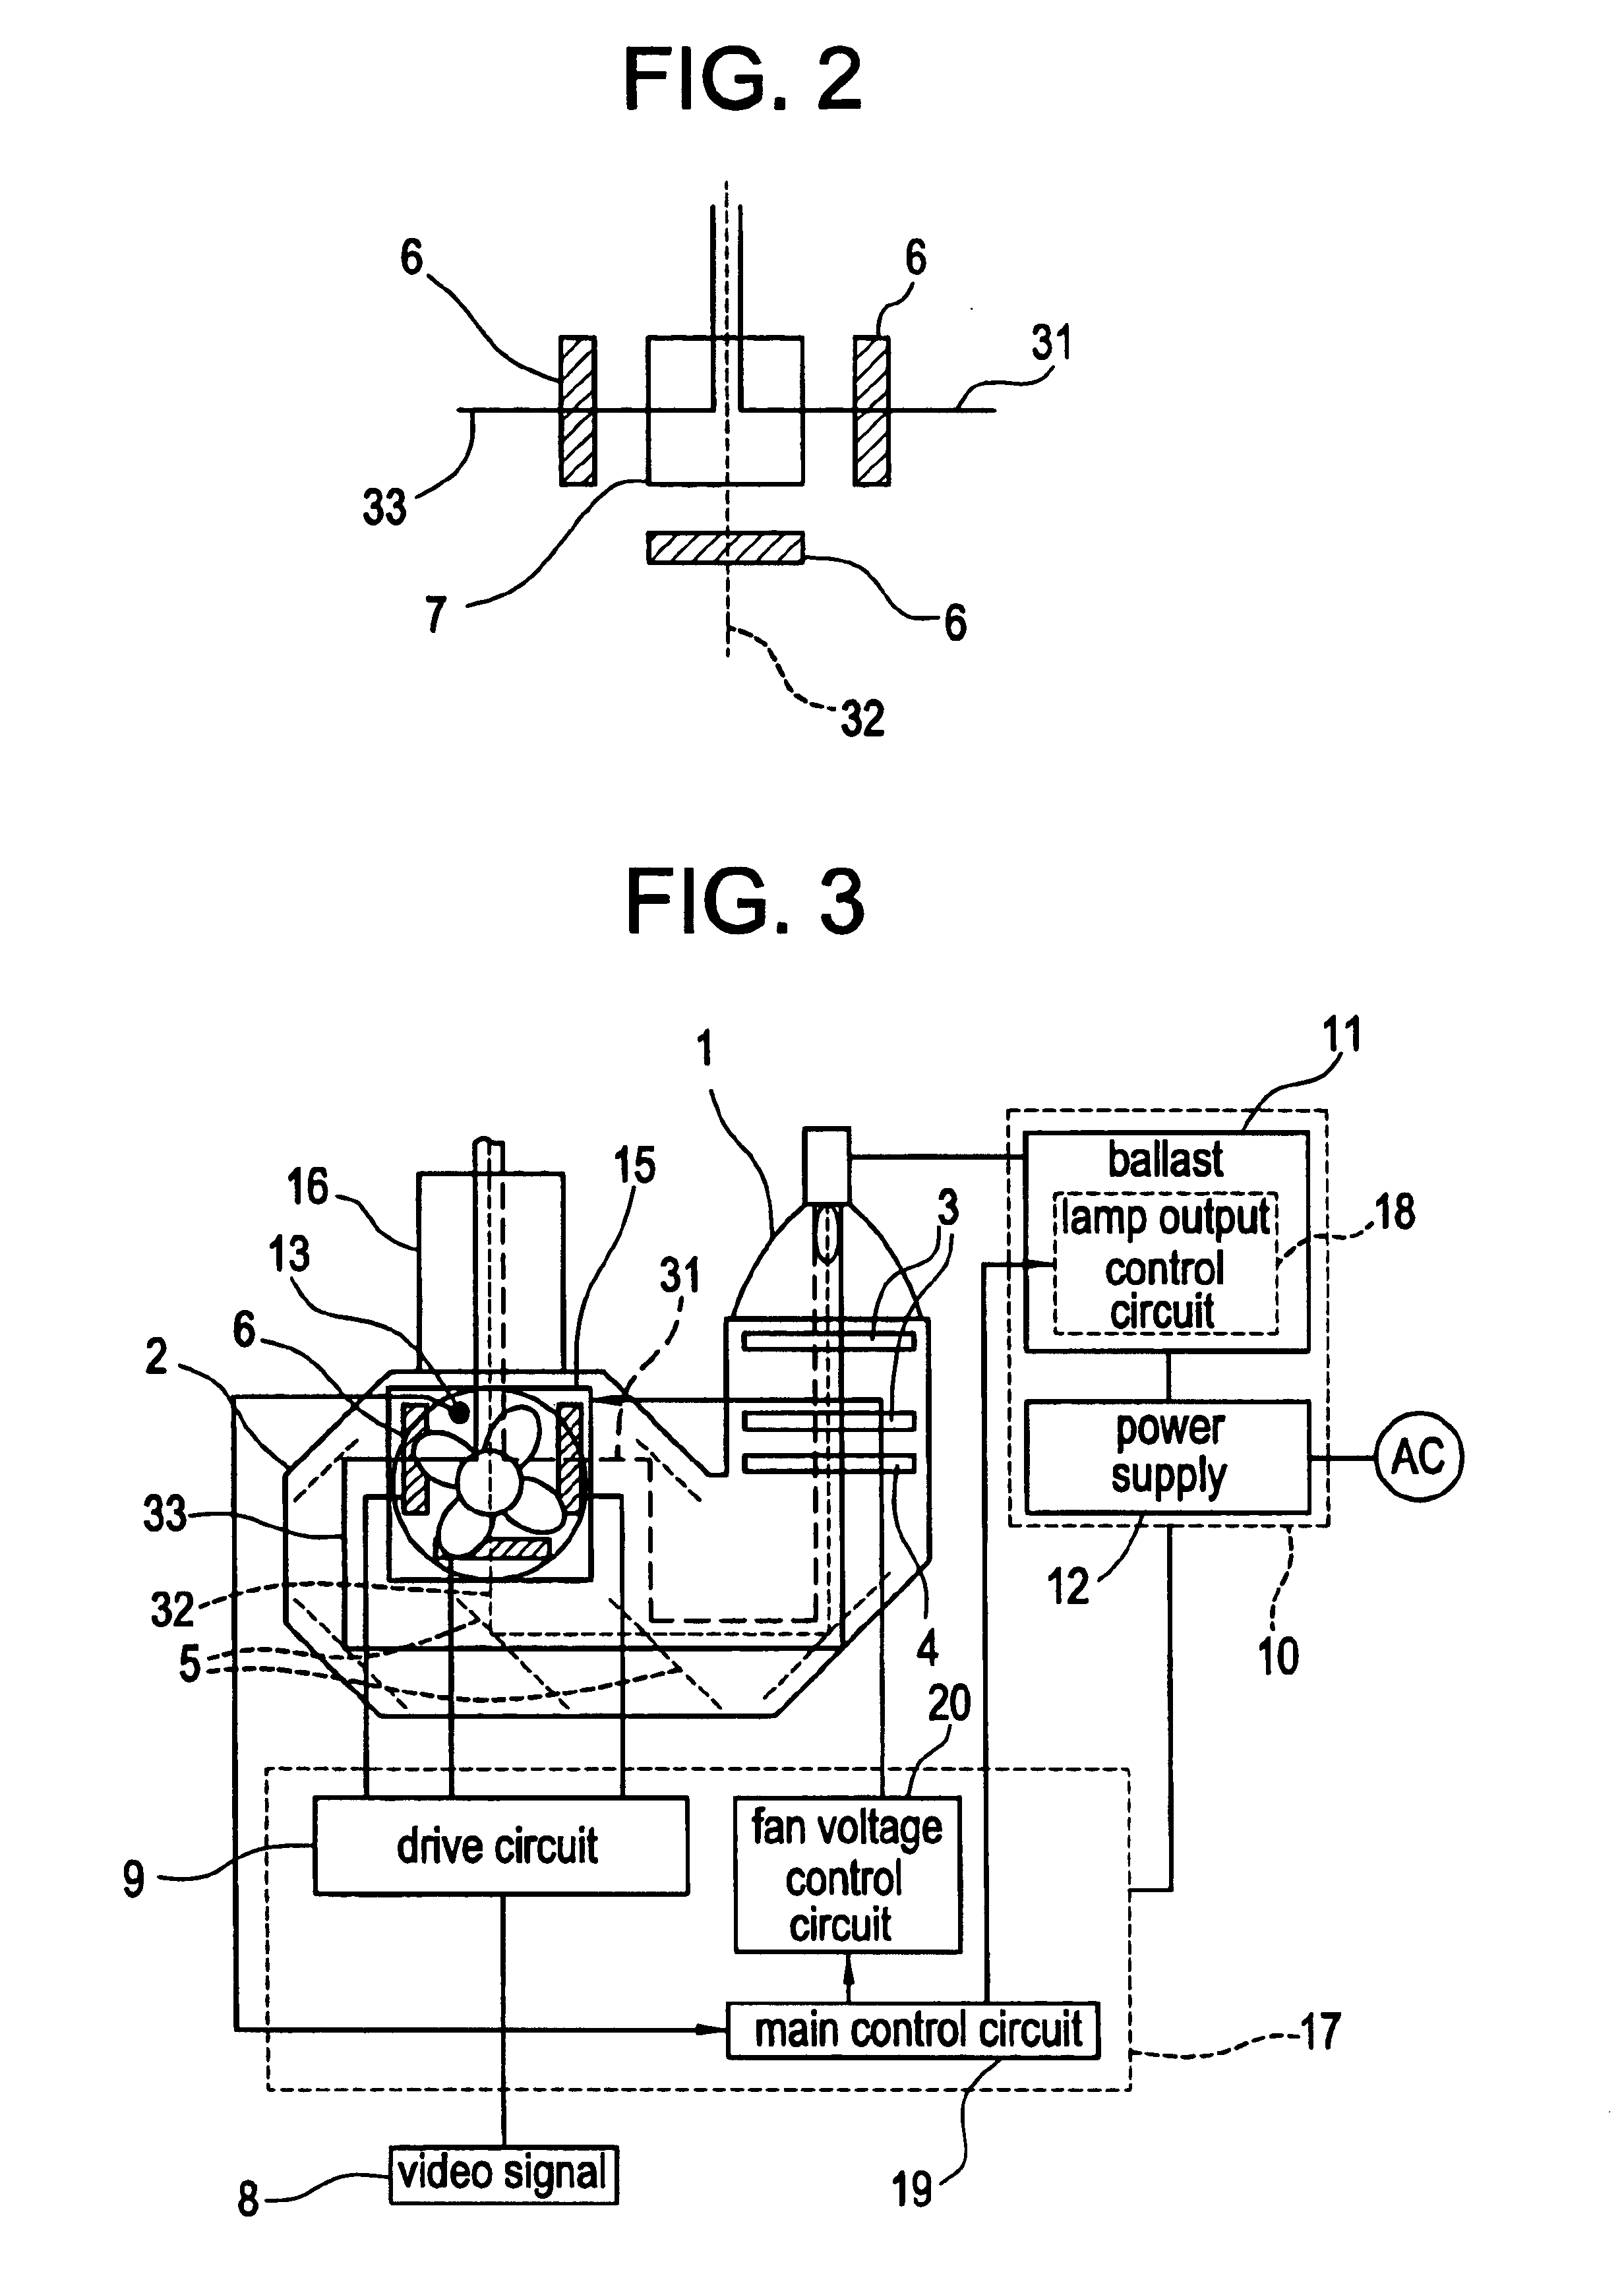 Projector with light source having variable brightness based on detected temperature information